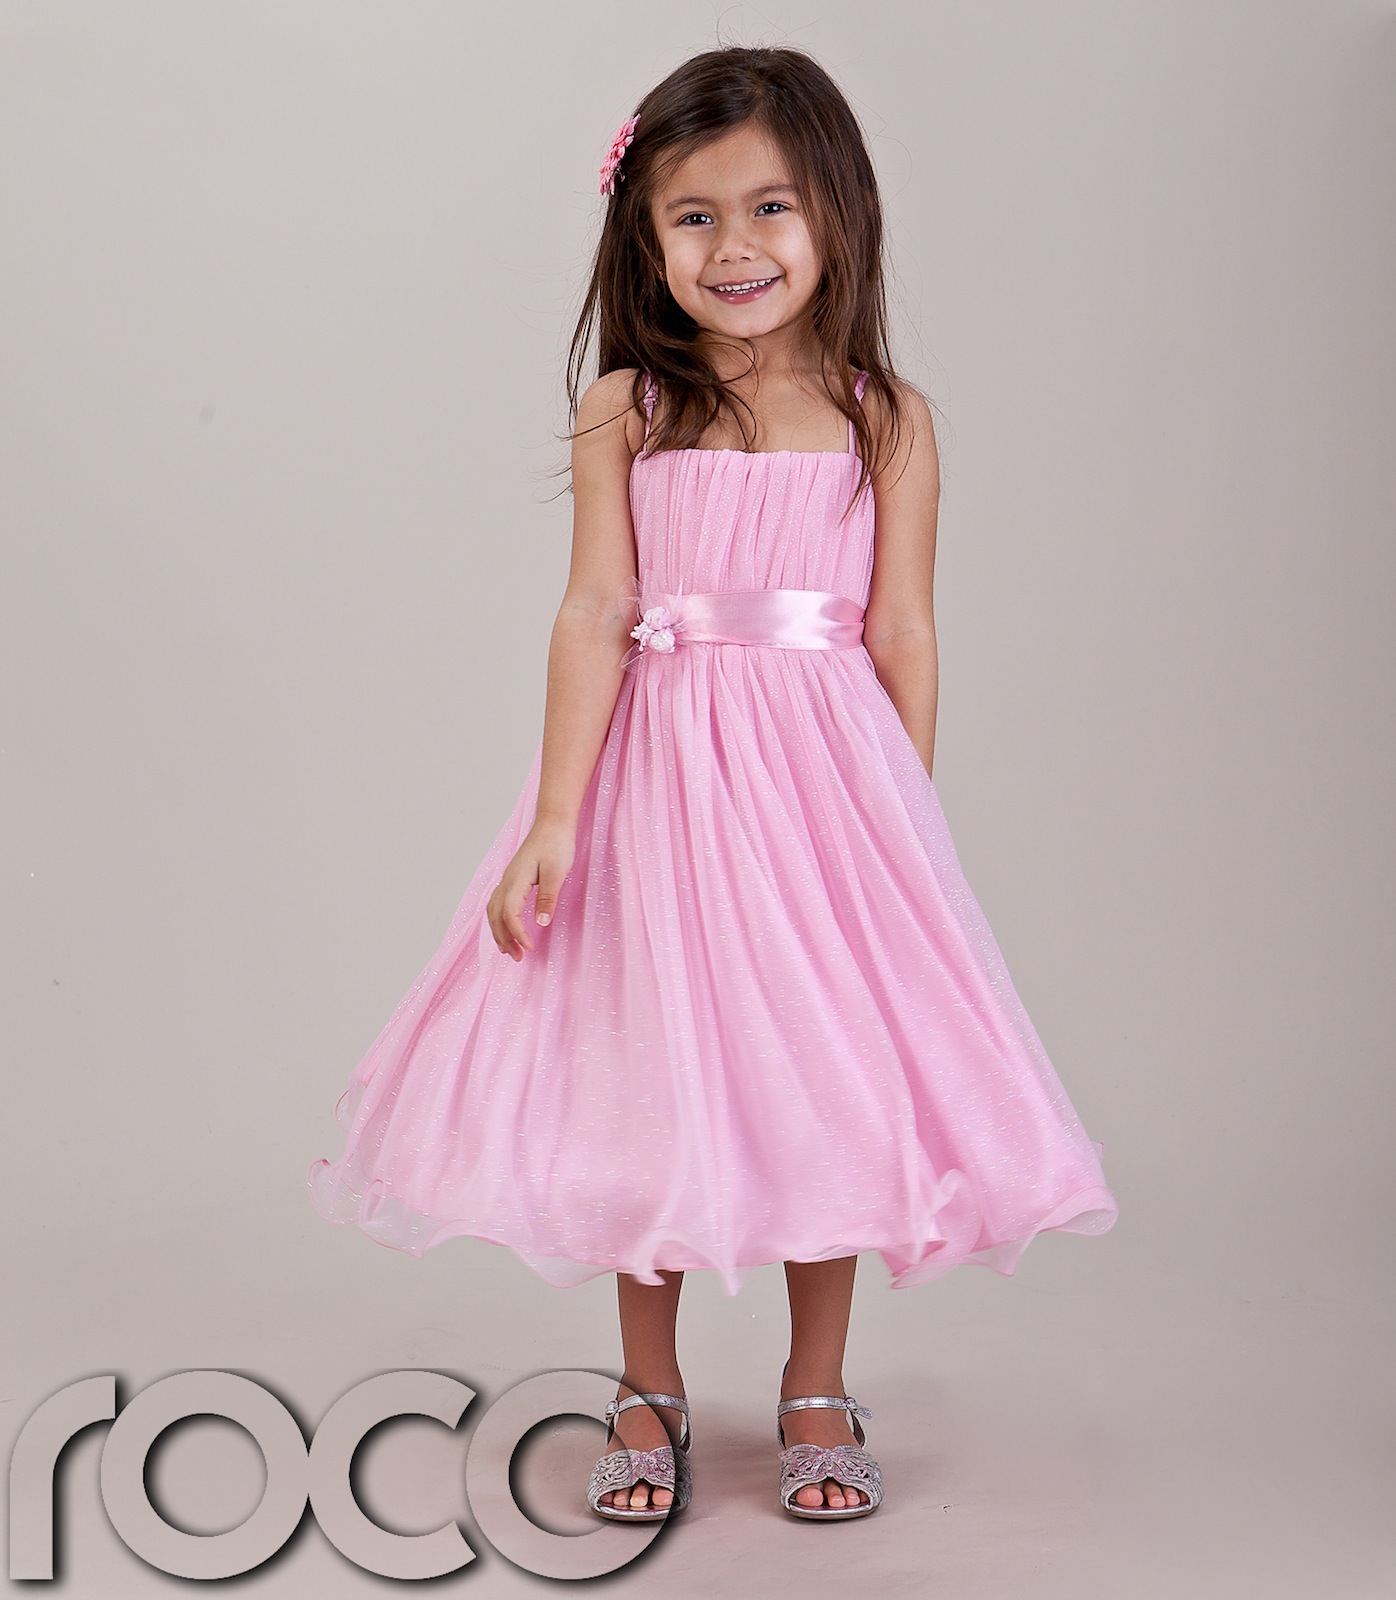 Dress Of Small Girl & Perfect Choices